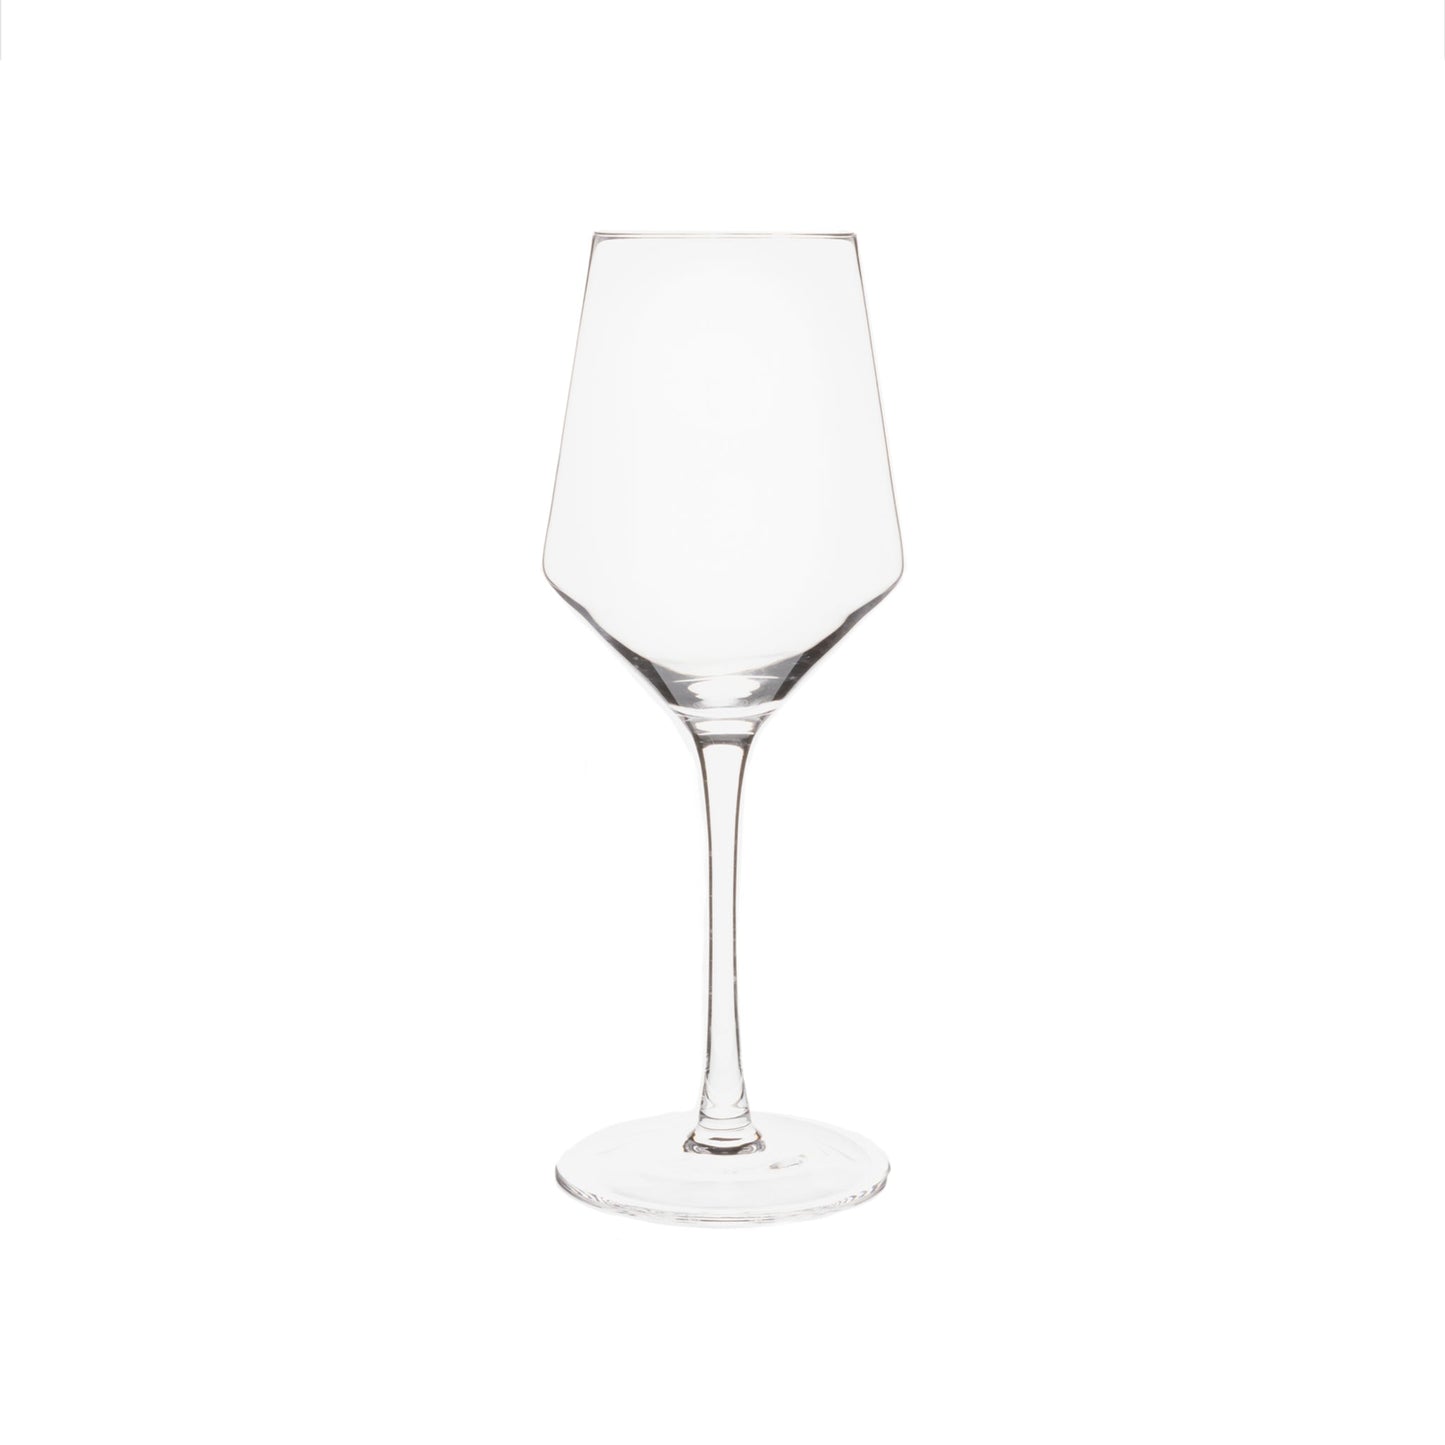 Set of 4 White Wine Glasses - 14 Oz by Creative Gifts